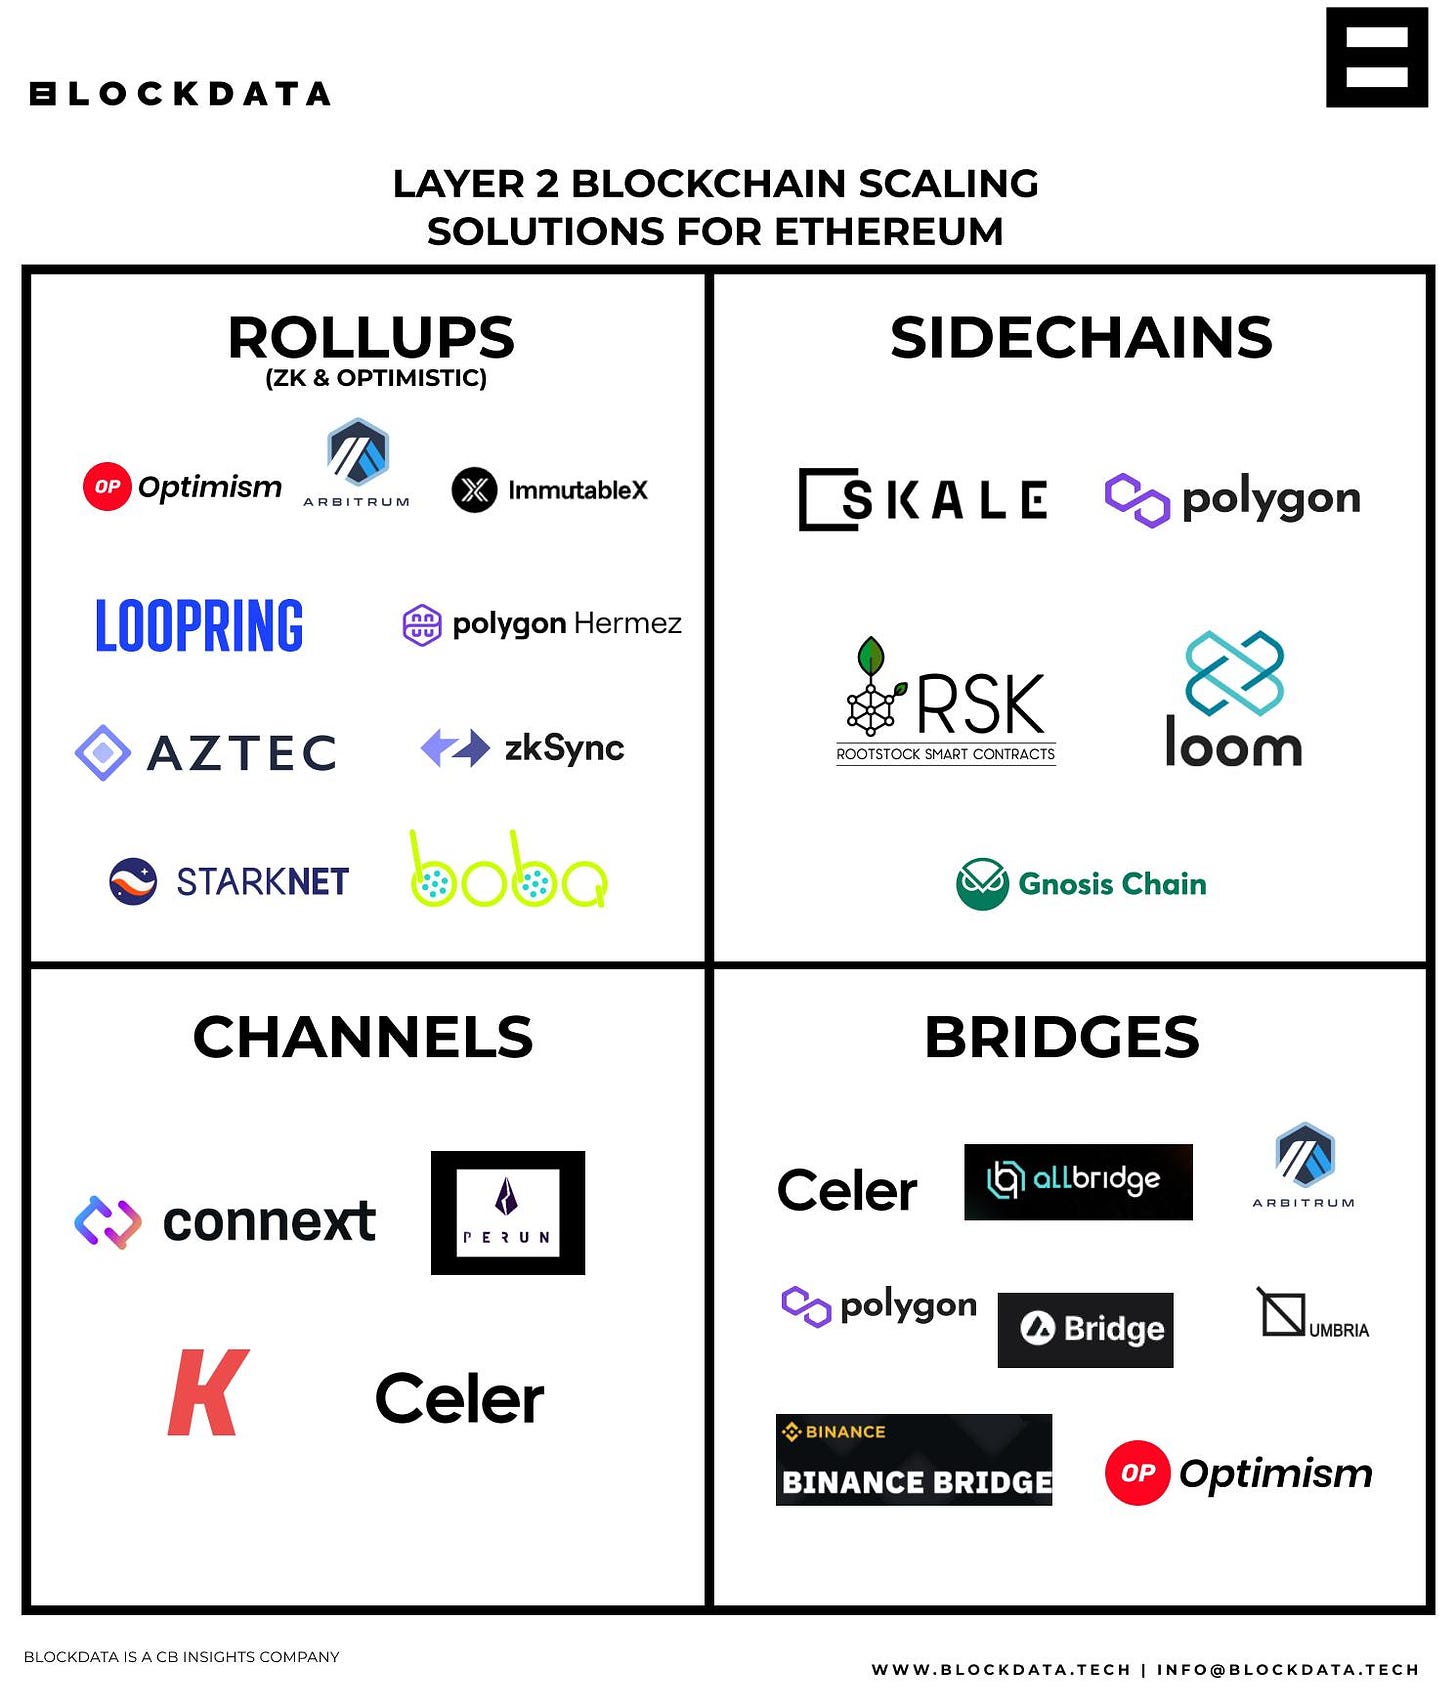 Layer 2 Blockchain Solutions for Ethereum